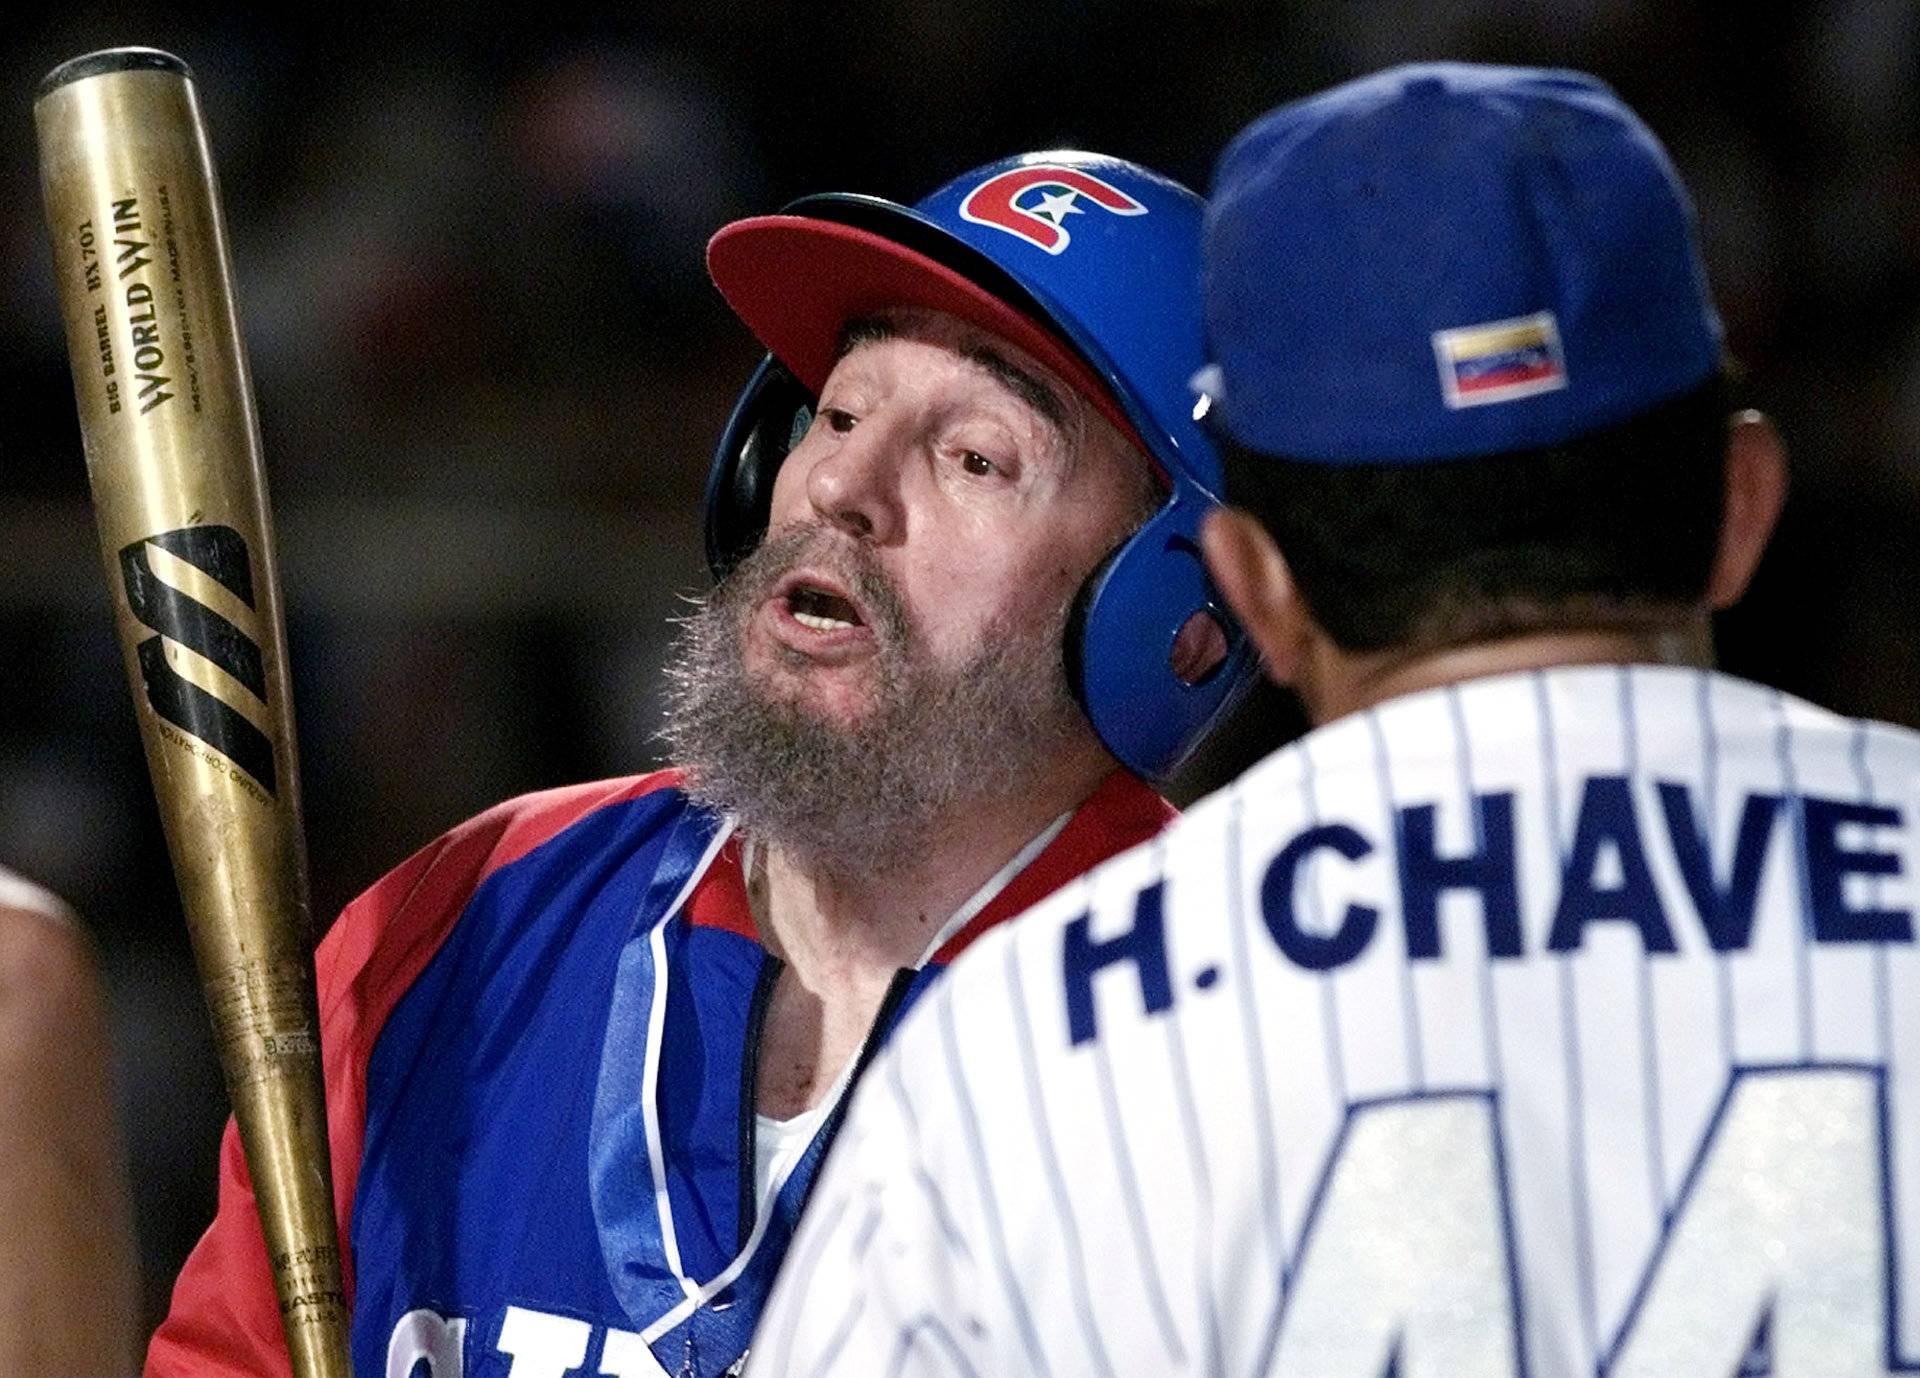 File photo of then Cuban President Fidel Castro and Venezuelan President Hugo Chavez joking during a batting session in a friendly baseball game between their two countries at the Barquisimeto baseball stadium